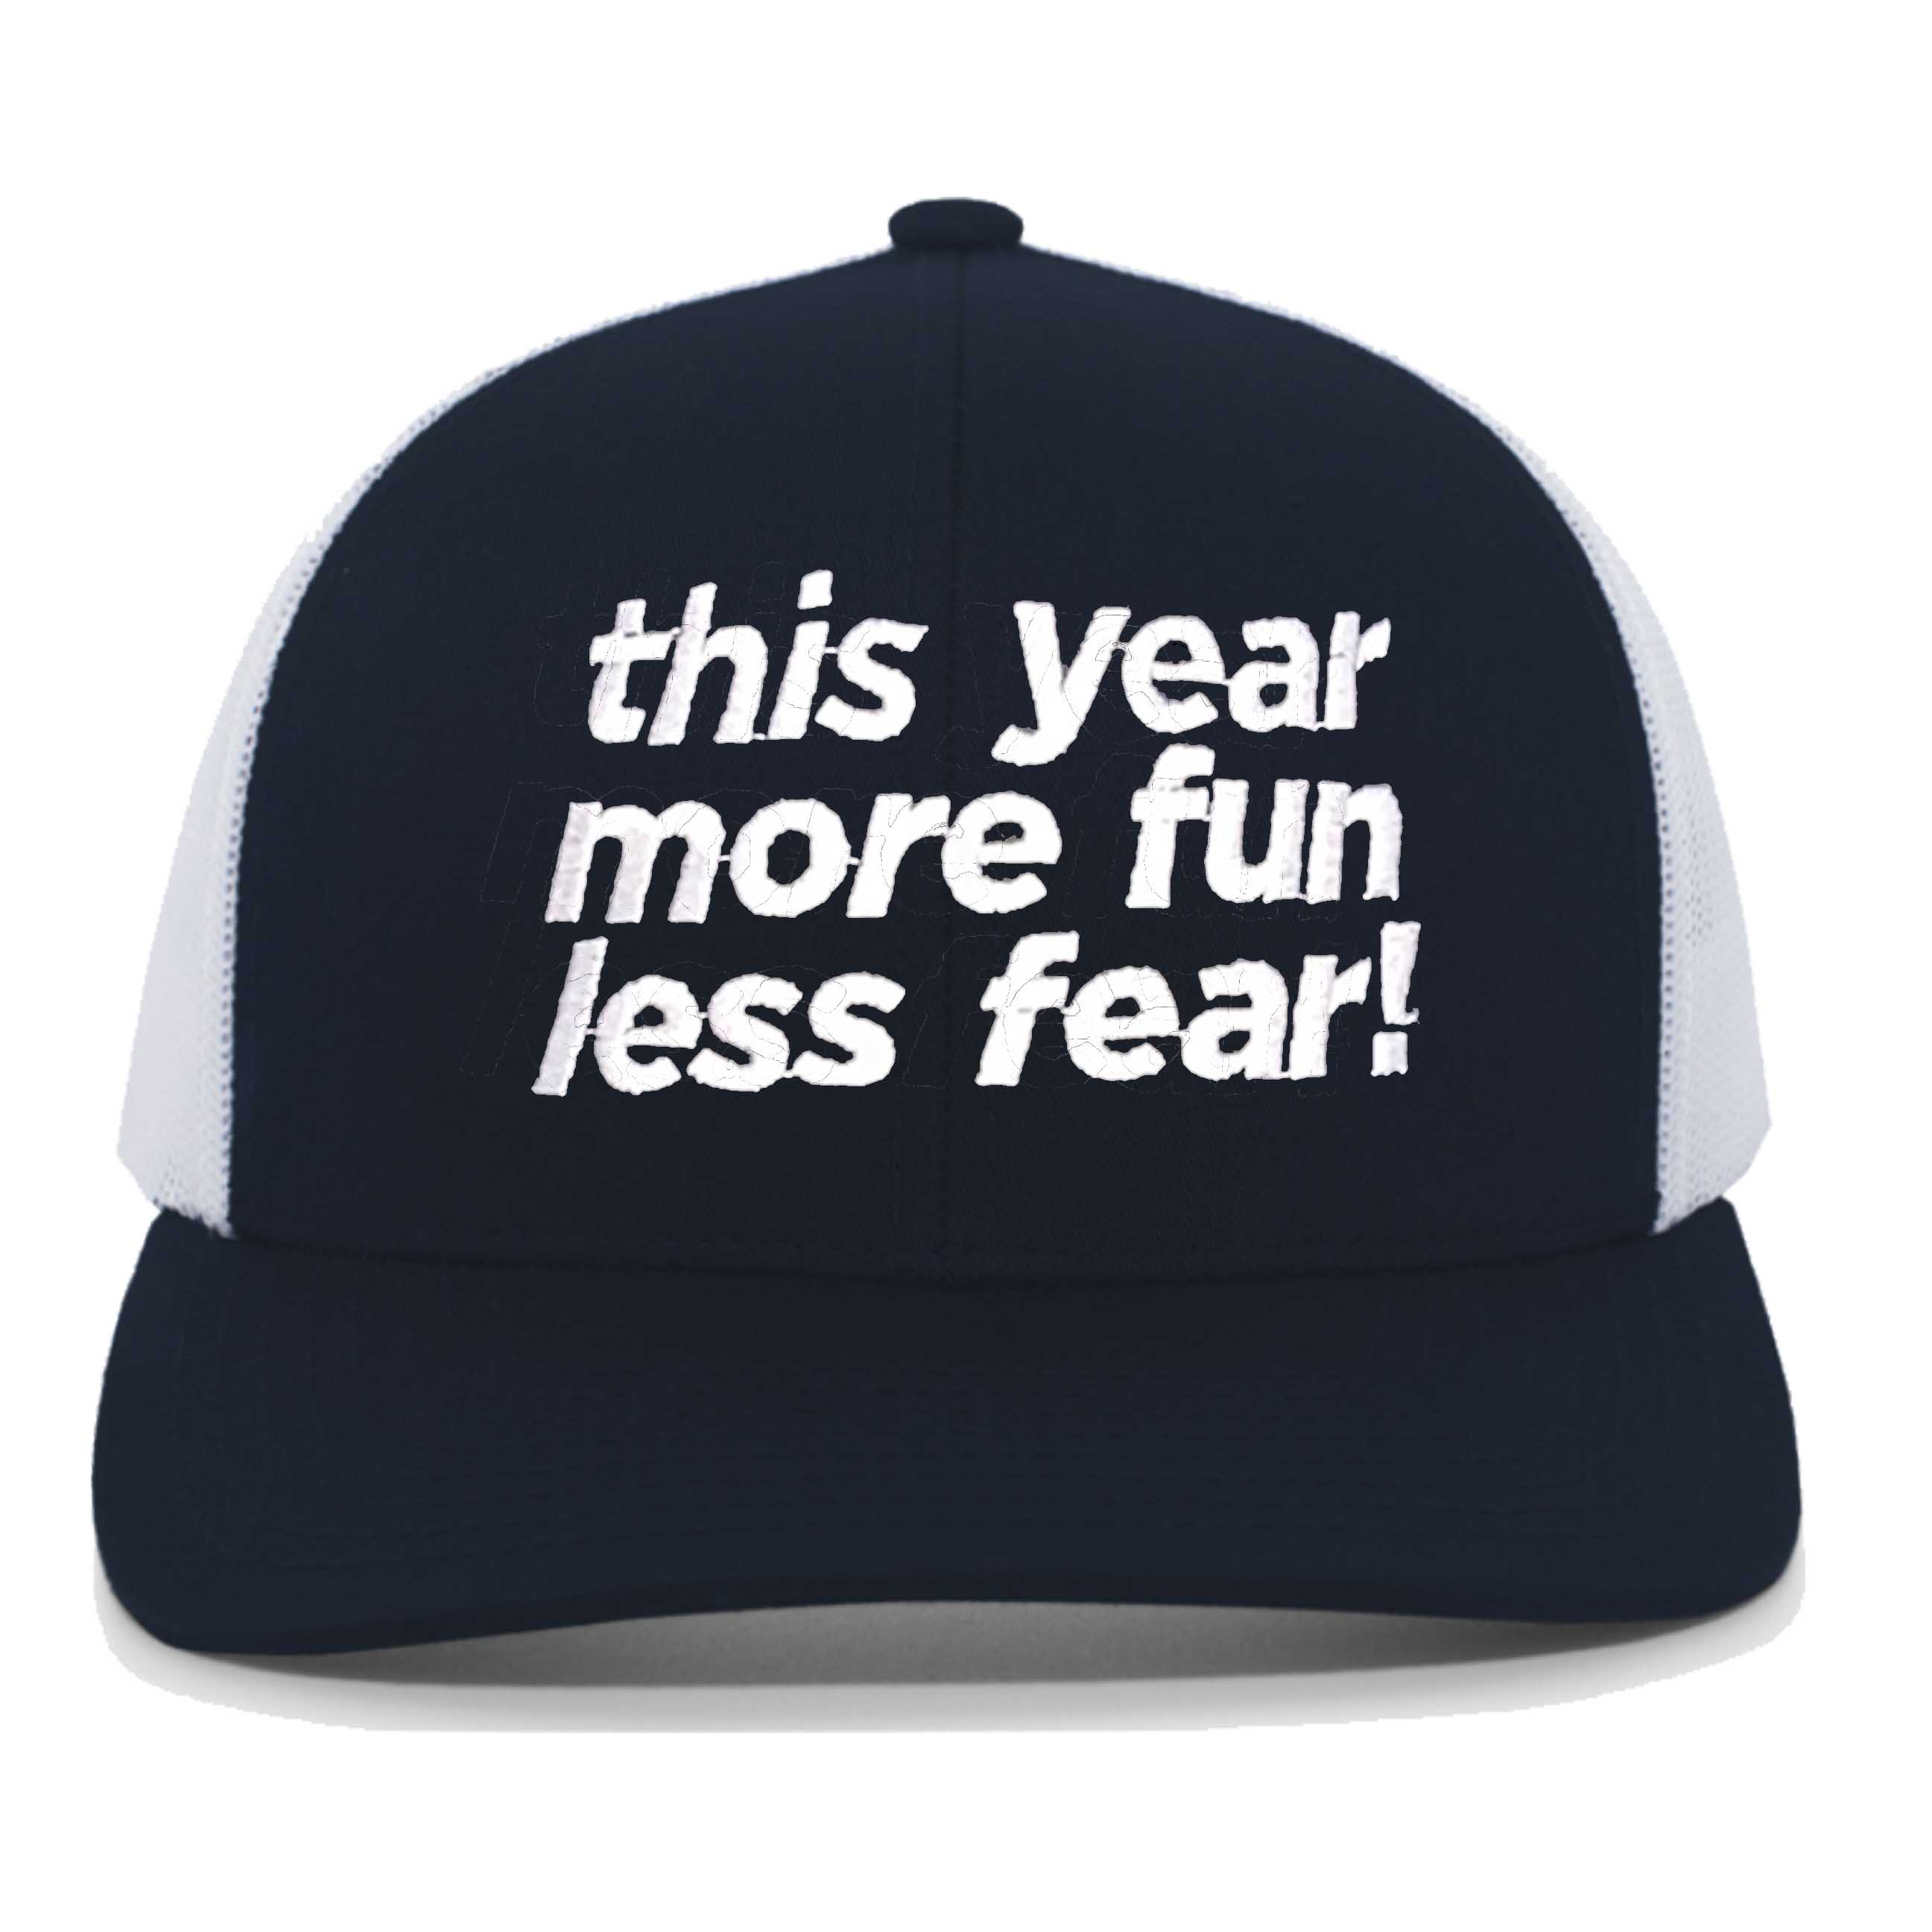 this year more fun less fear snapback hat navy white